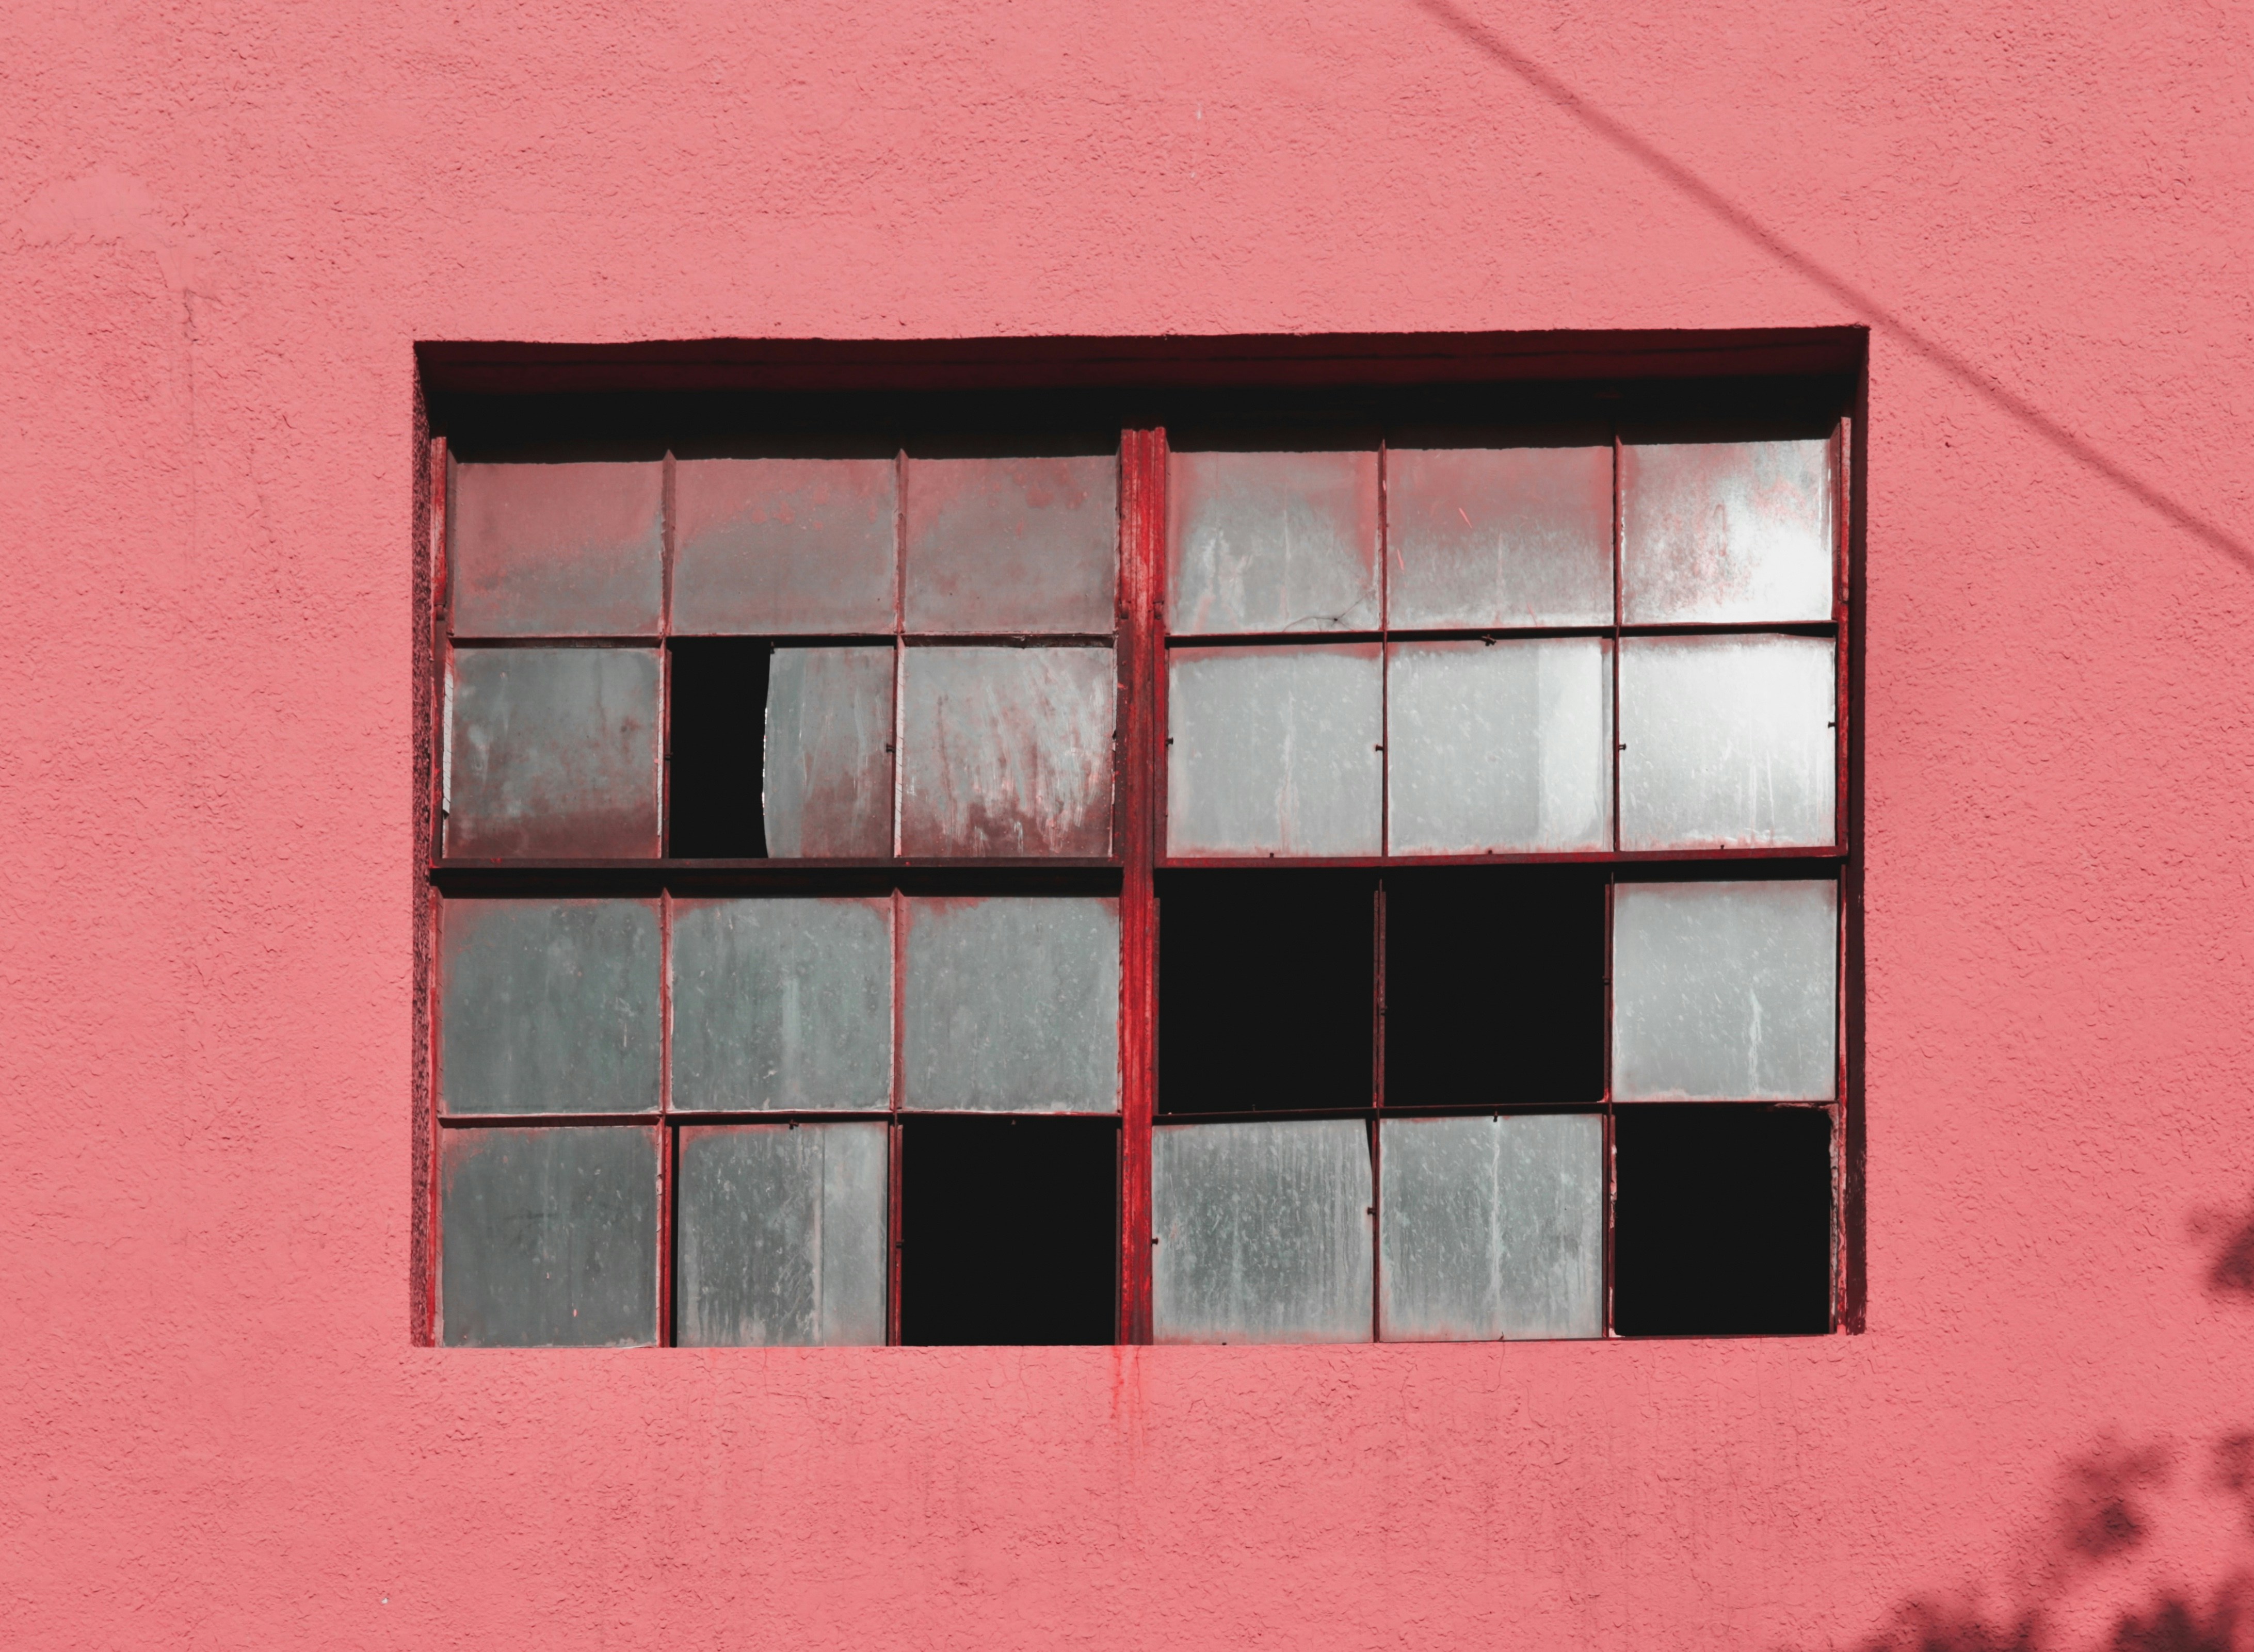 A window on a pink wall